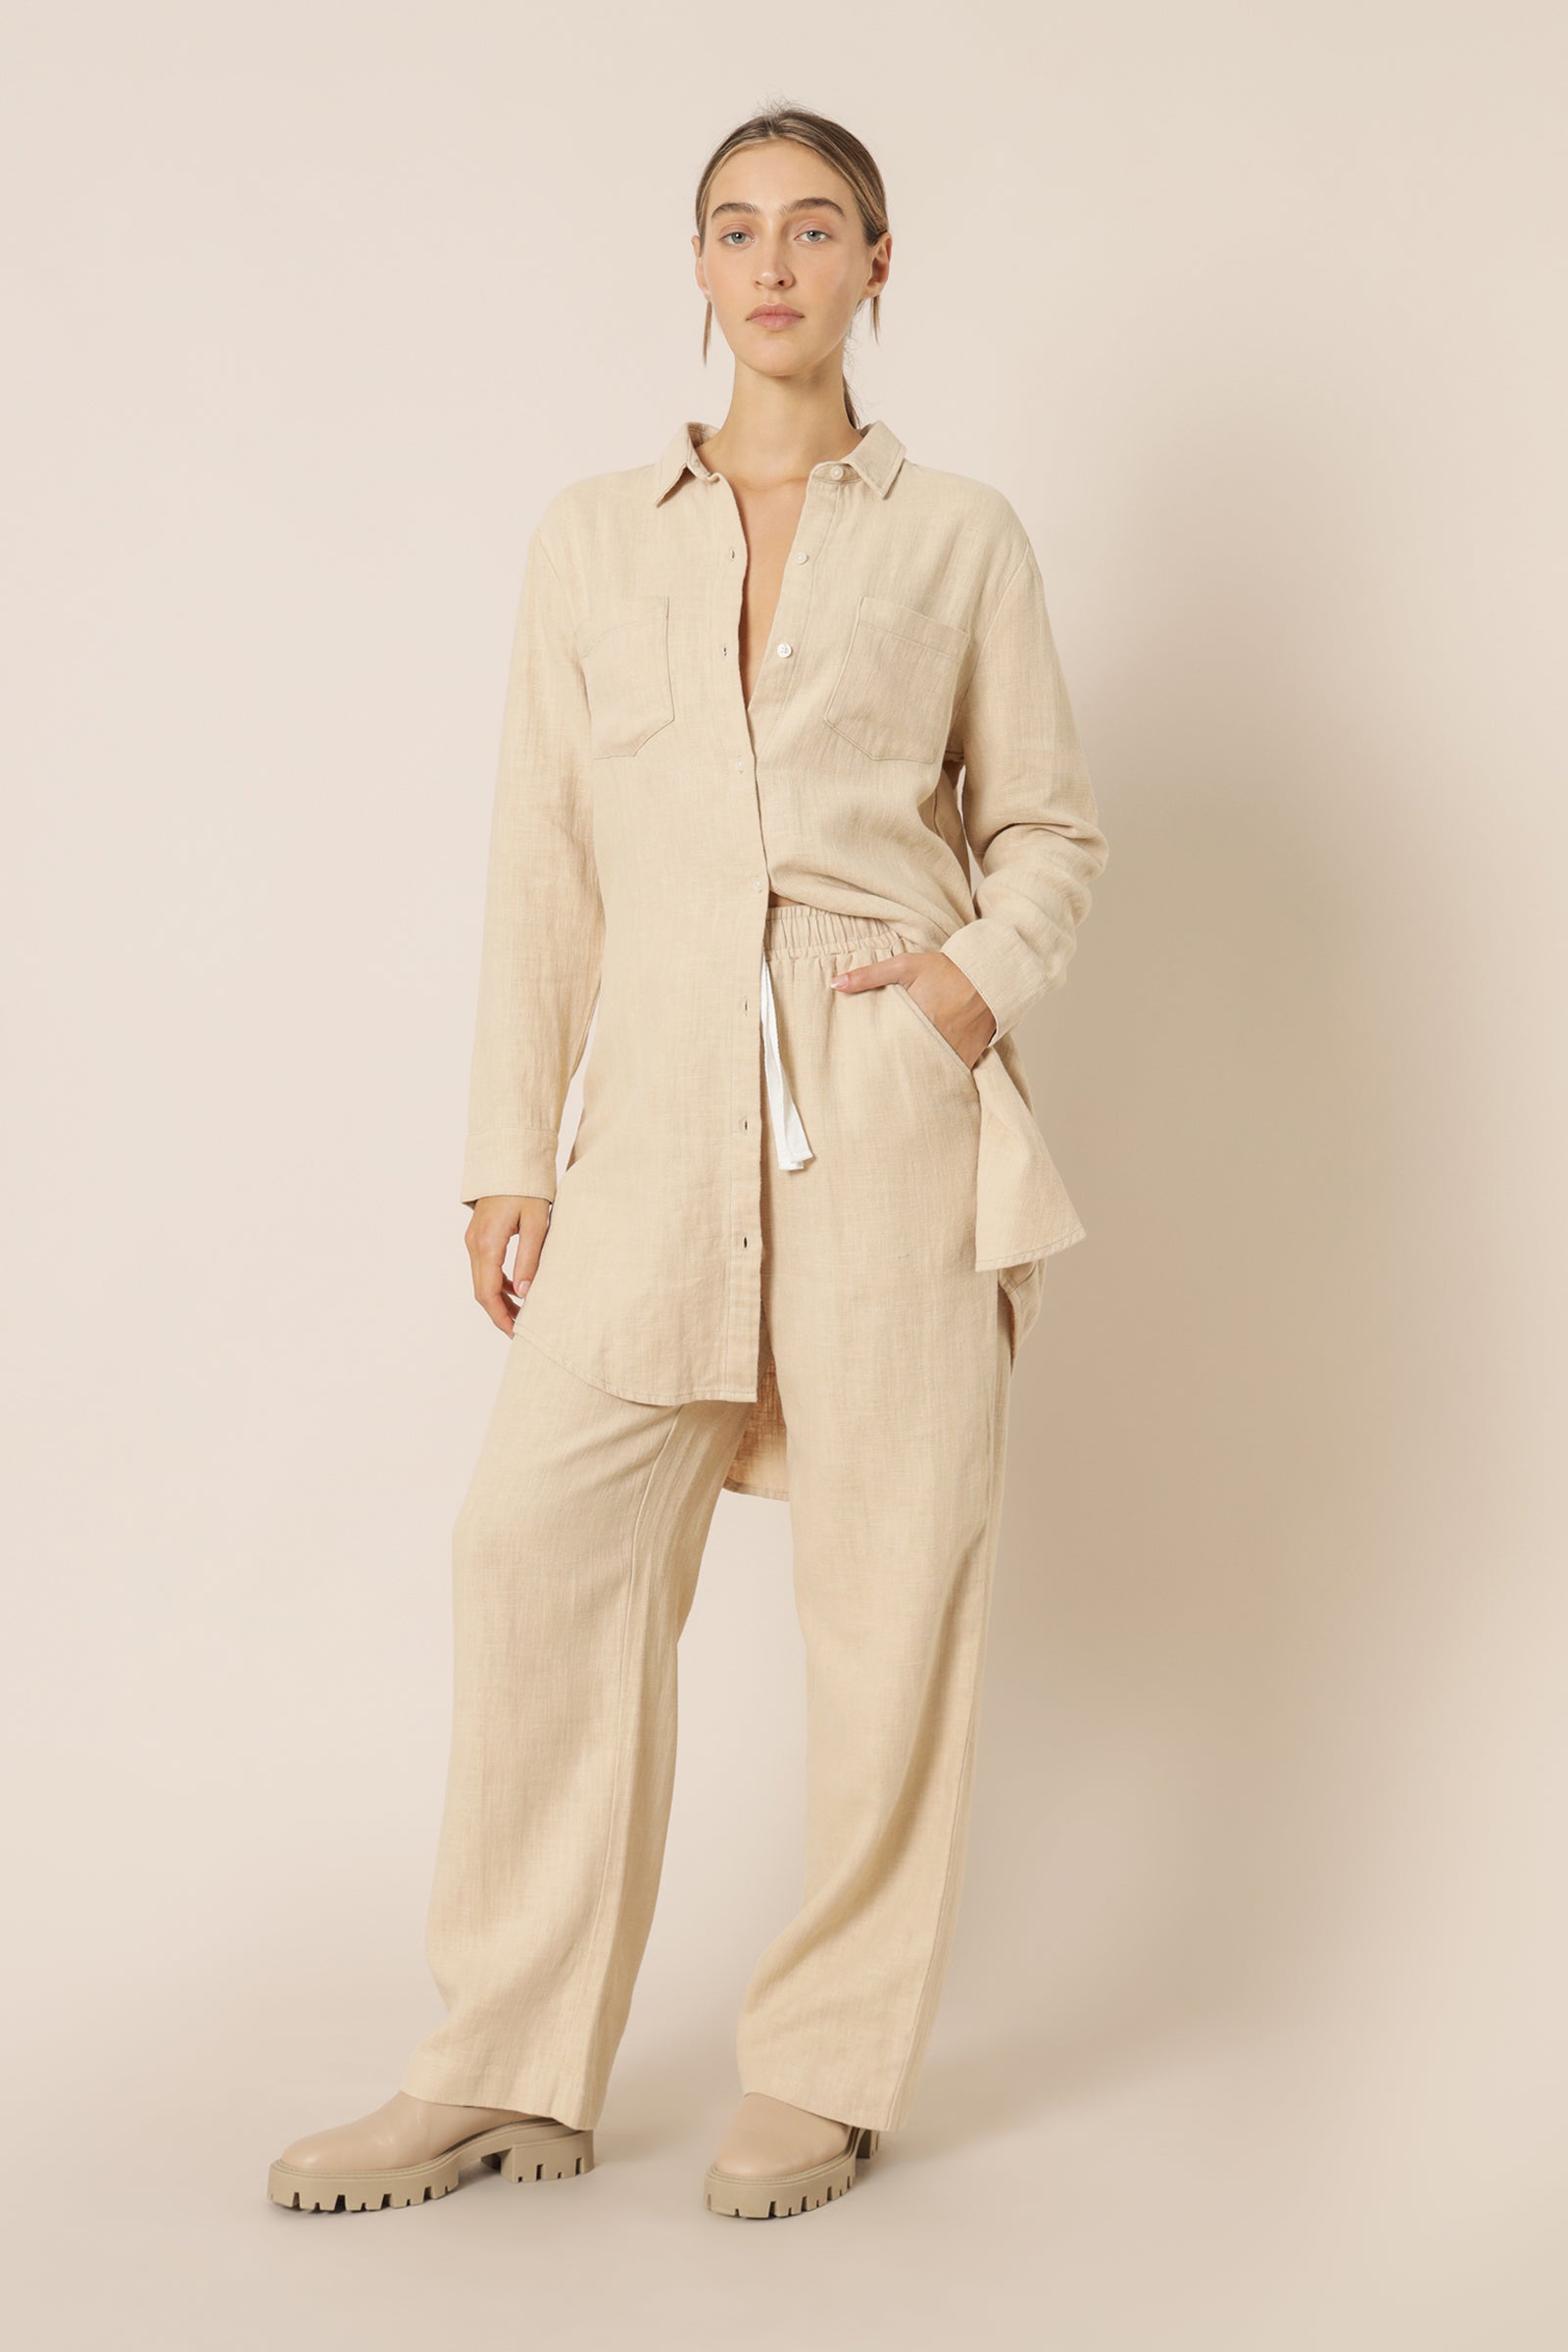 Nude Lucy marvin longline shirt oat shirt